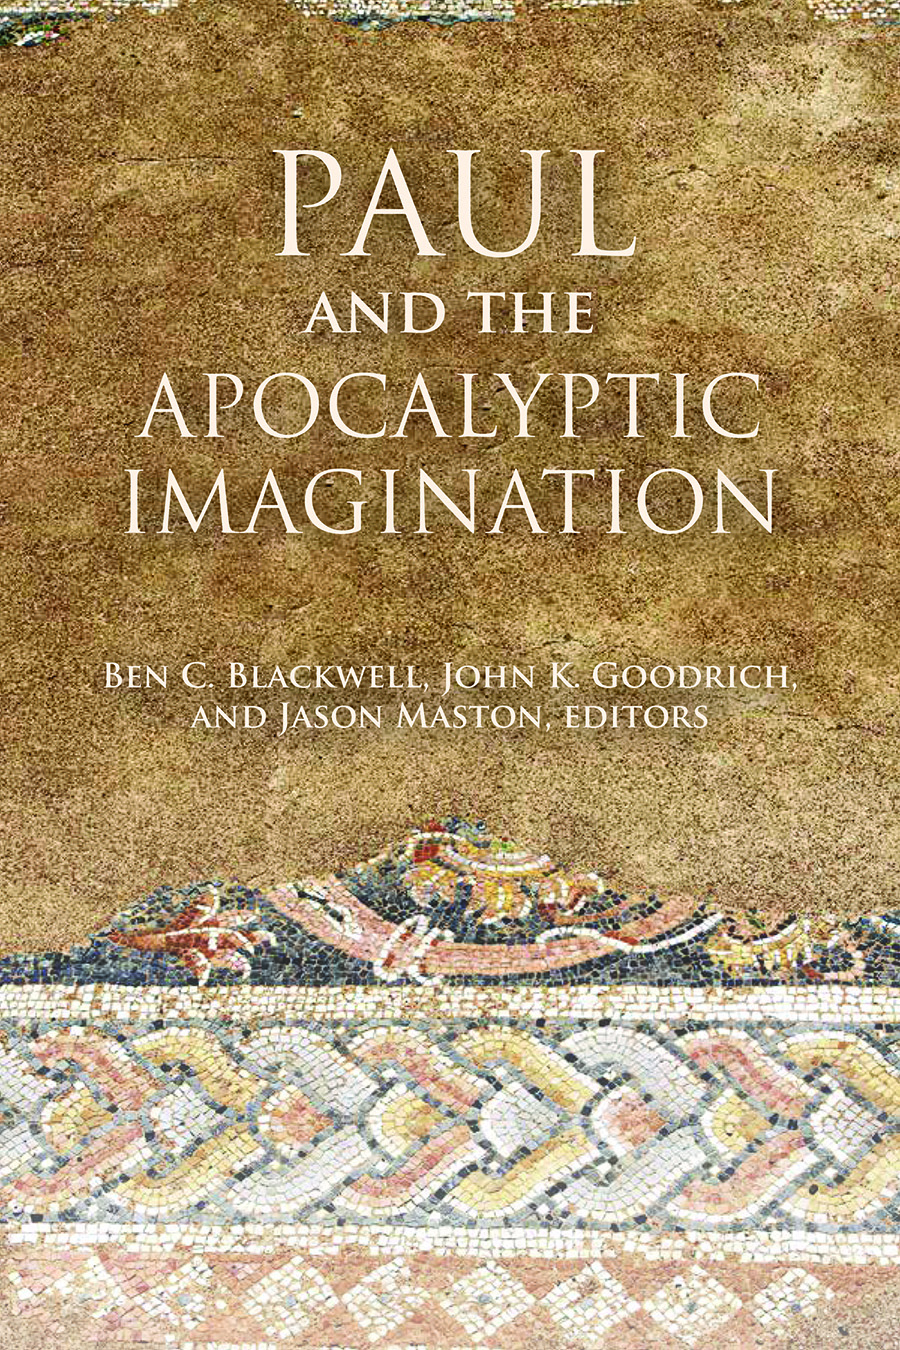 Some Remarks on Apocalyptic in Modern Christian Theology